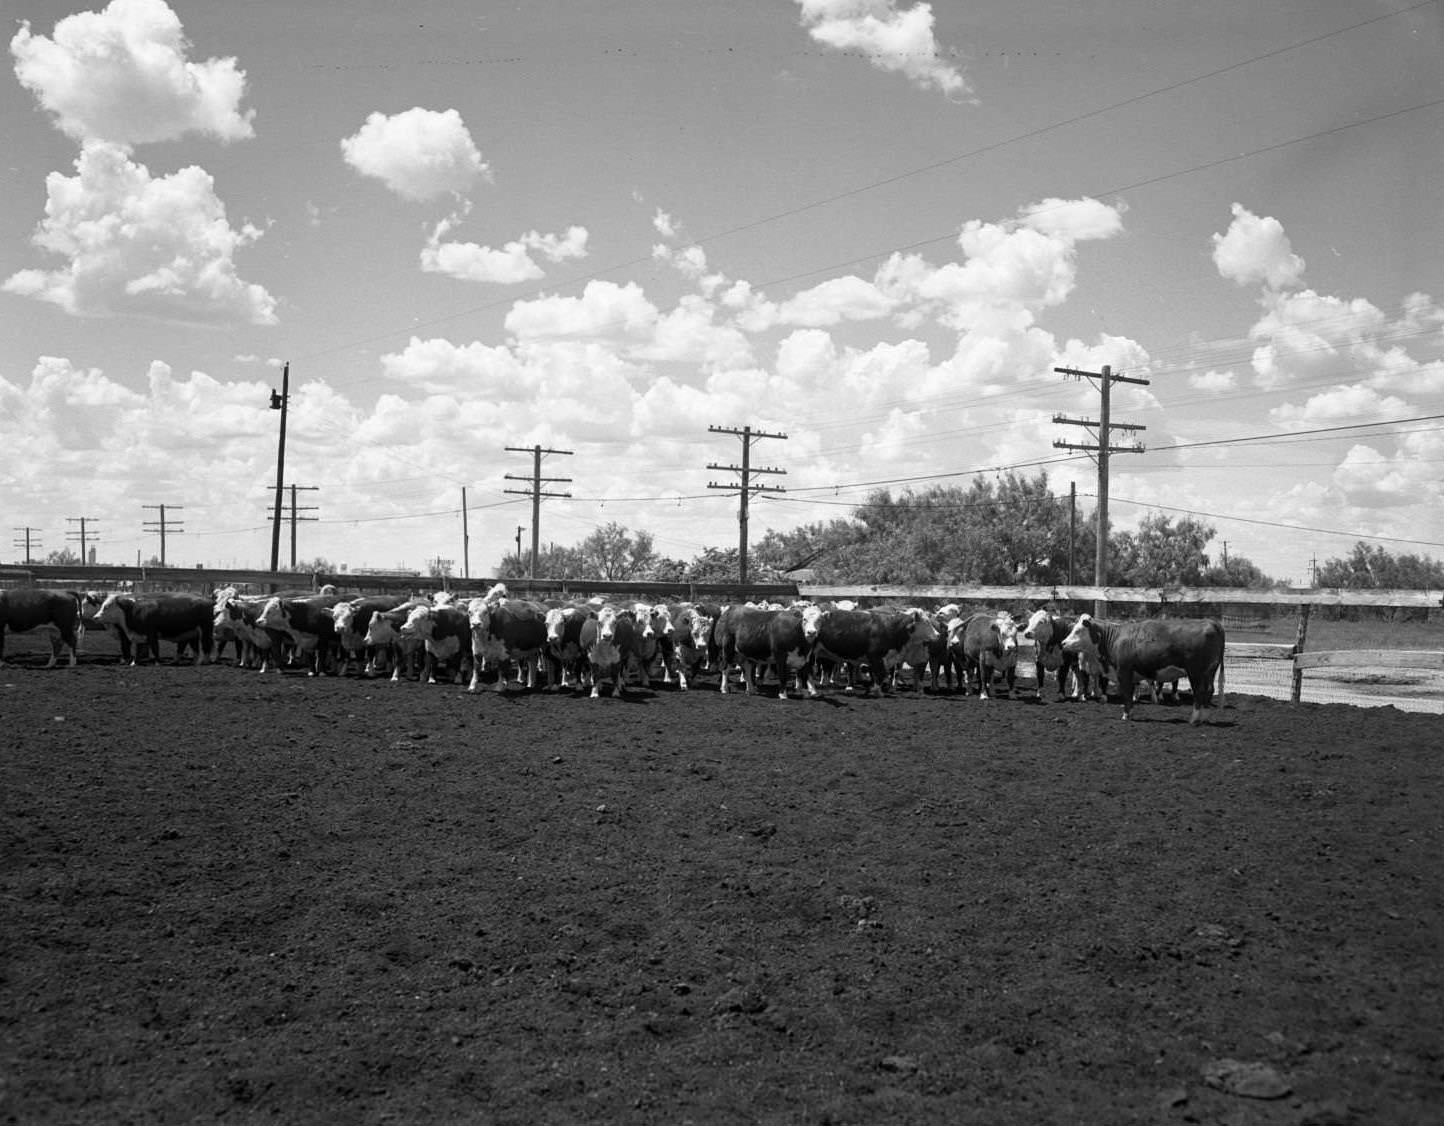 A herd of cattle surrounded by a fence near Highway Eighty East in Abilene, Texas, 1958